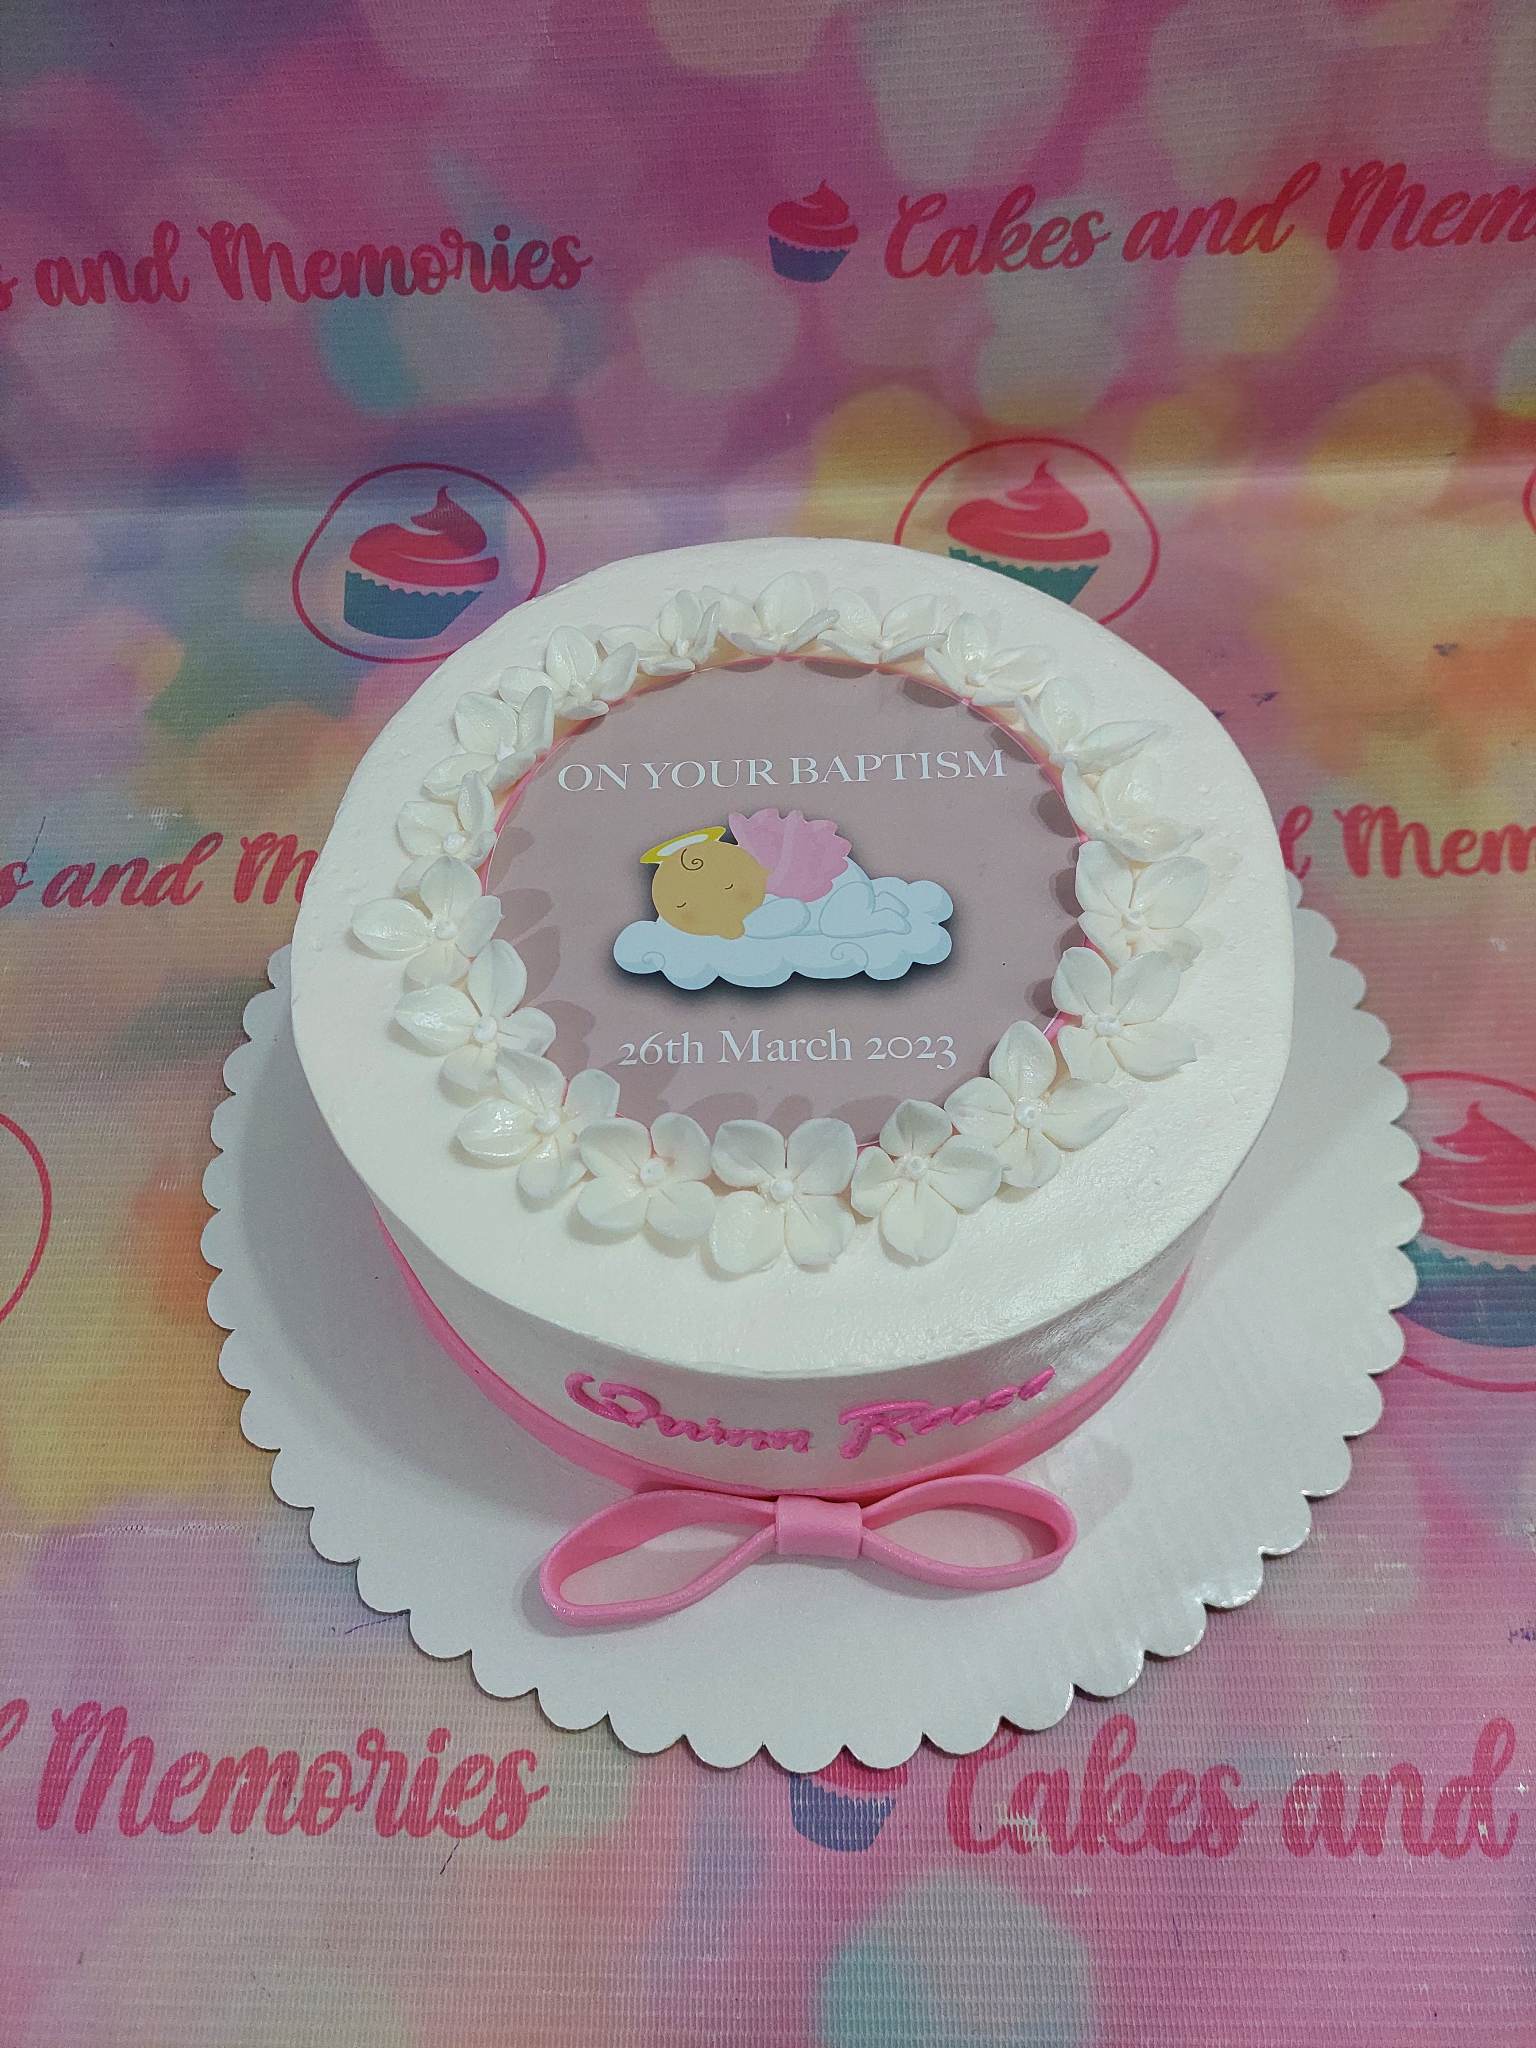 This beautiful Christening Girl Cake is sure to make an impression. Decorated with a pink sleeping baby, it is perfect for a christening or baptismal. Made with the highest quality ingredients, this customized cake is a unique and special way to celebrate a birthday or special occasion.